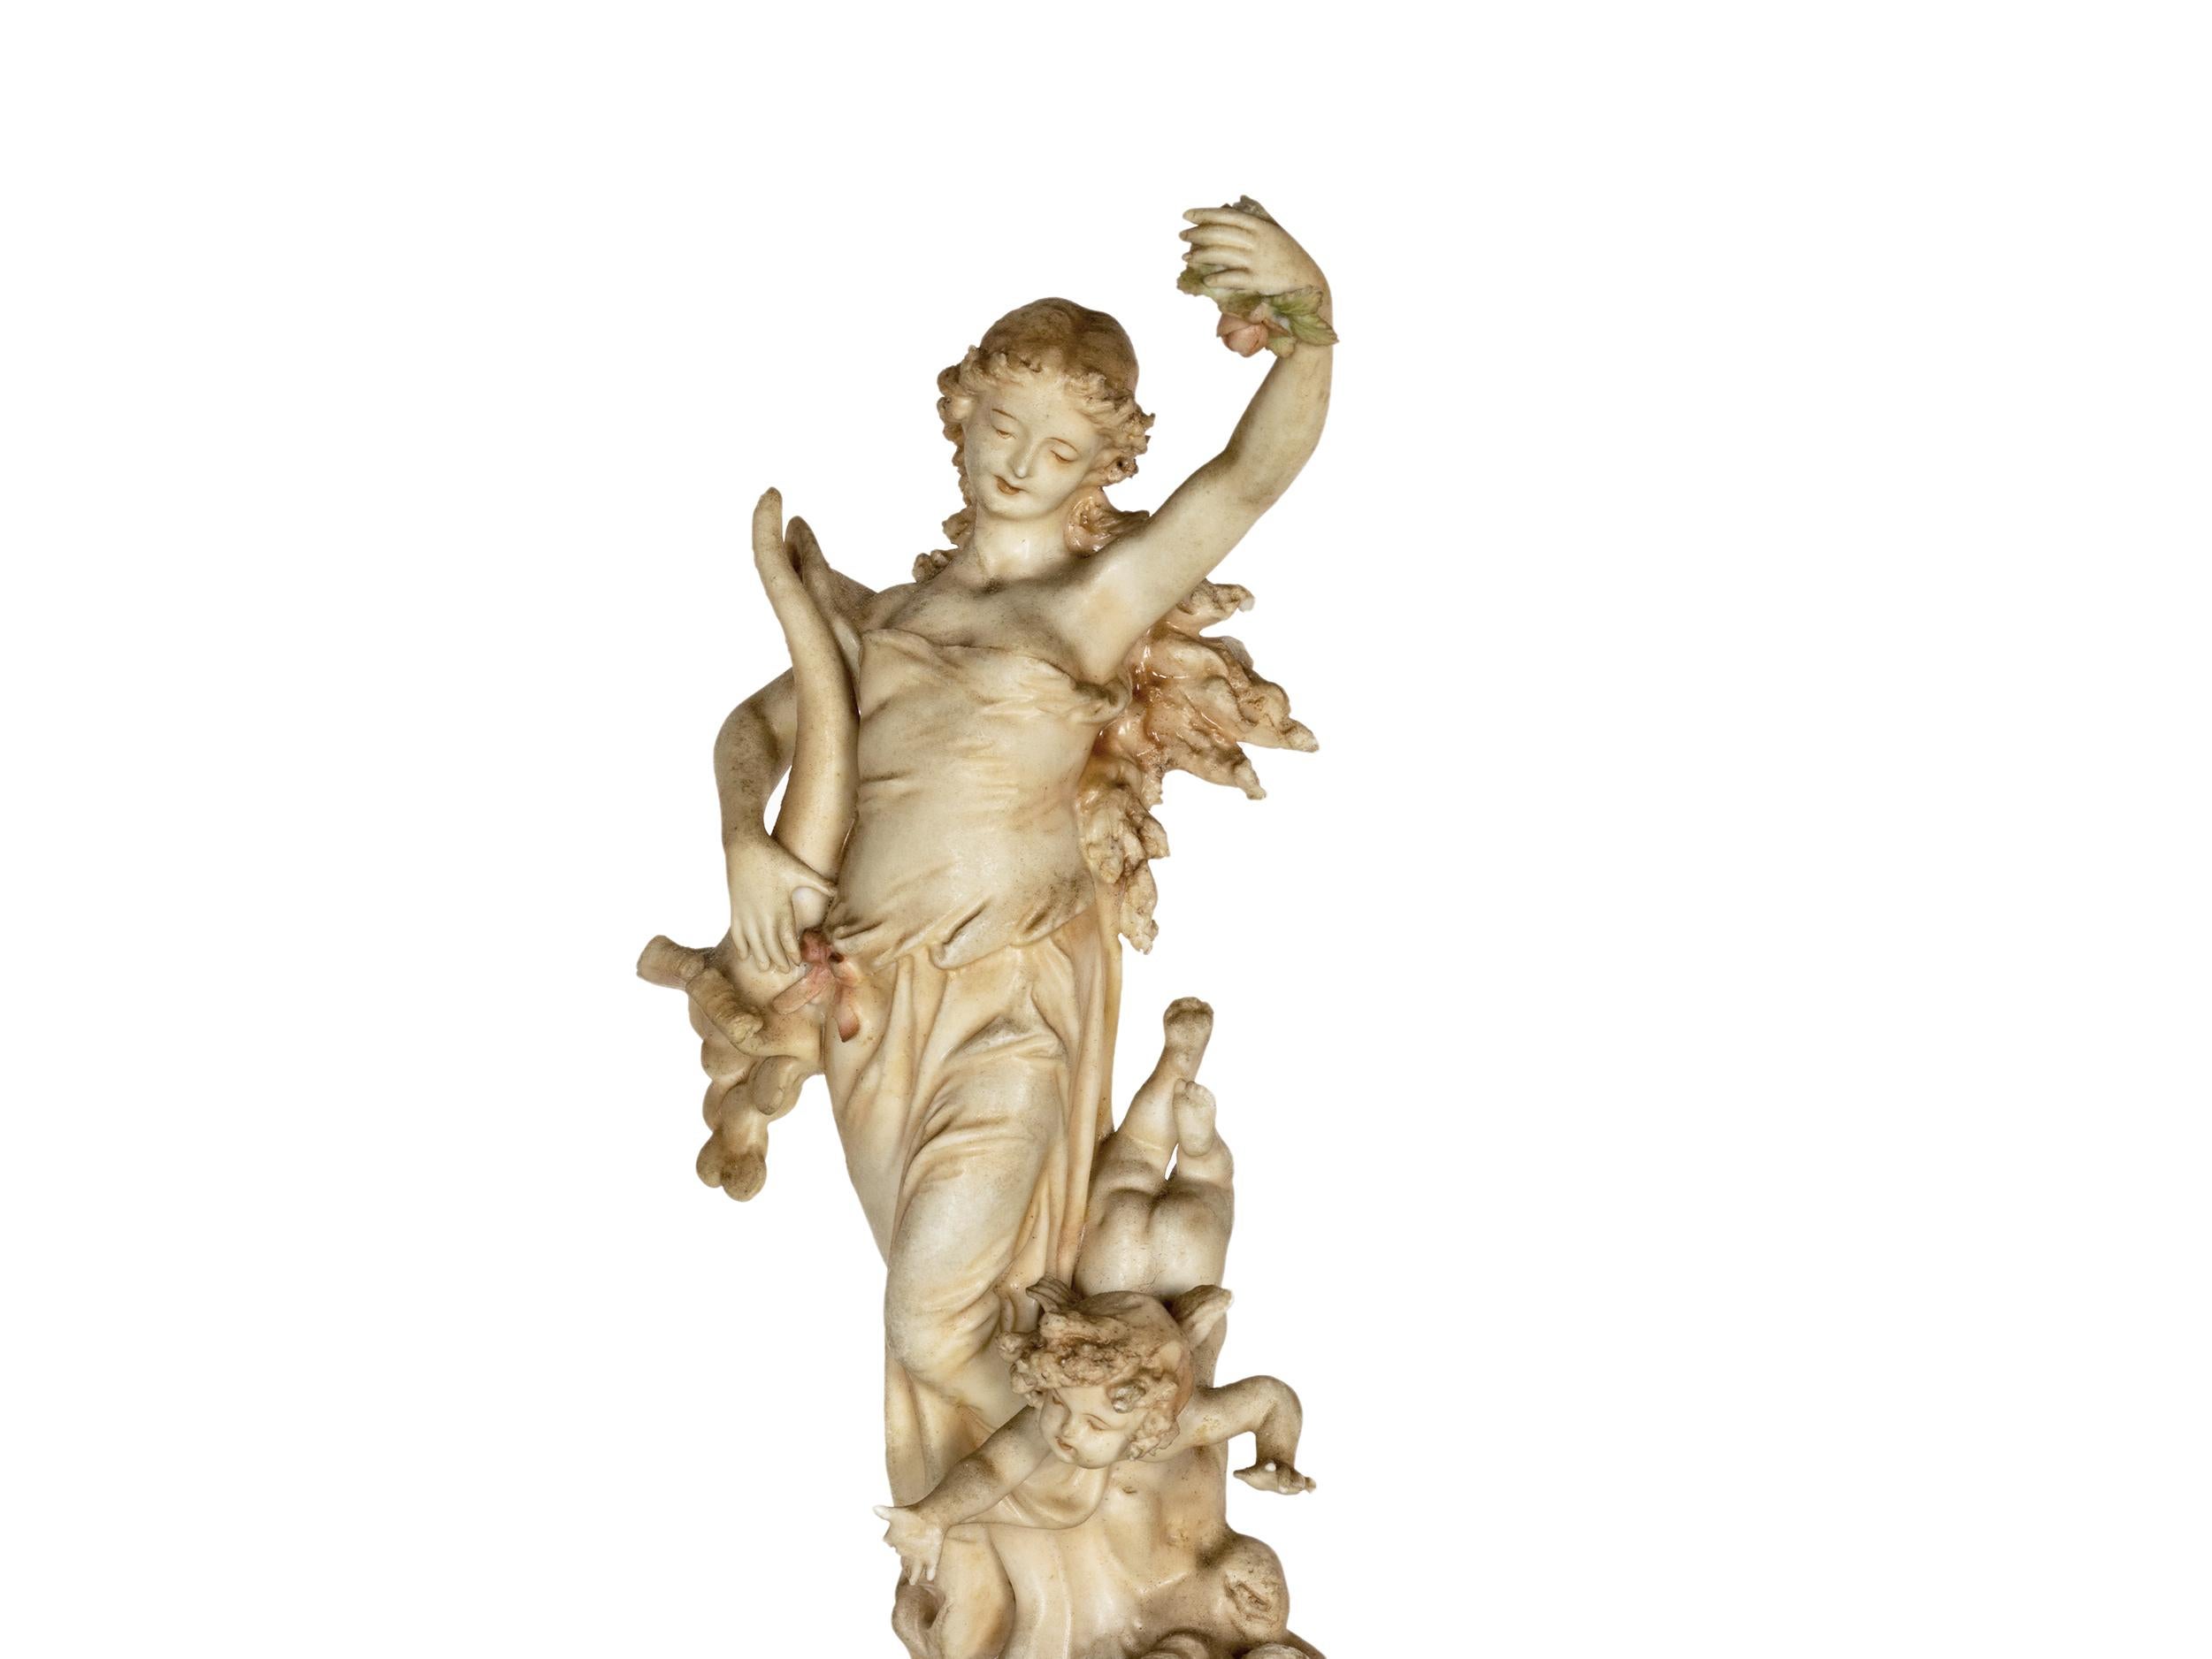 French Porcelain Fortuna Goddess Tyche Statue, Art Nouveau, 20th Century For Sale 1